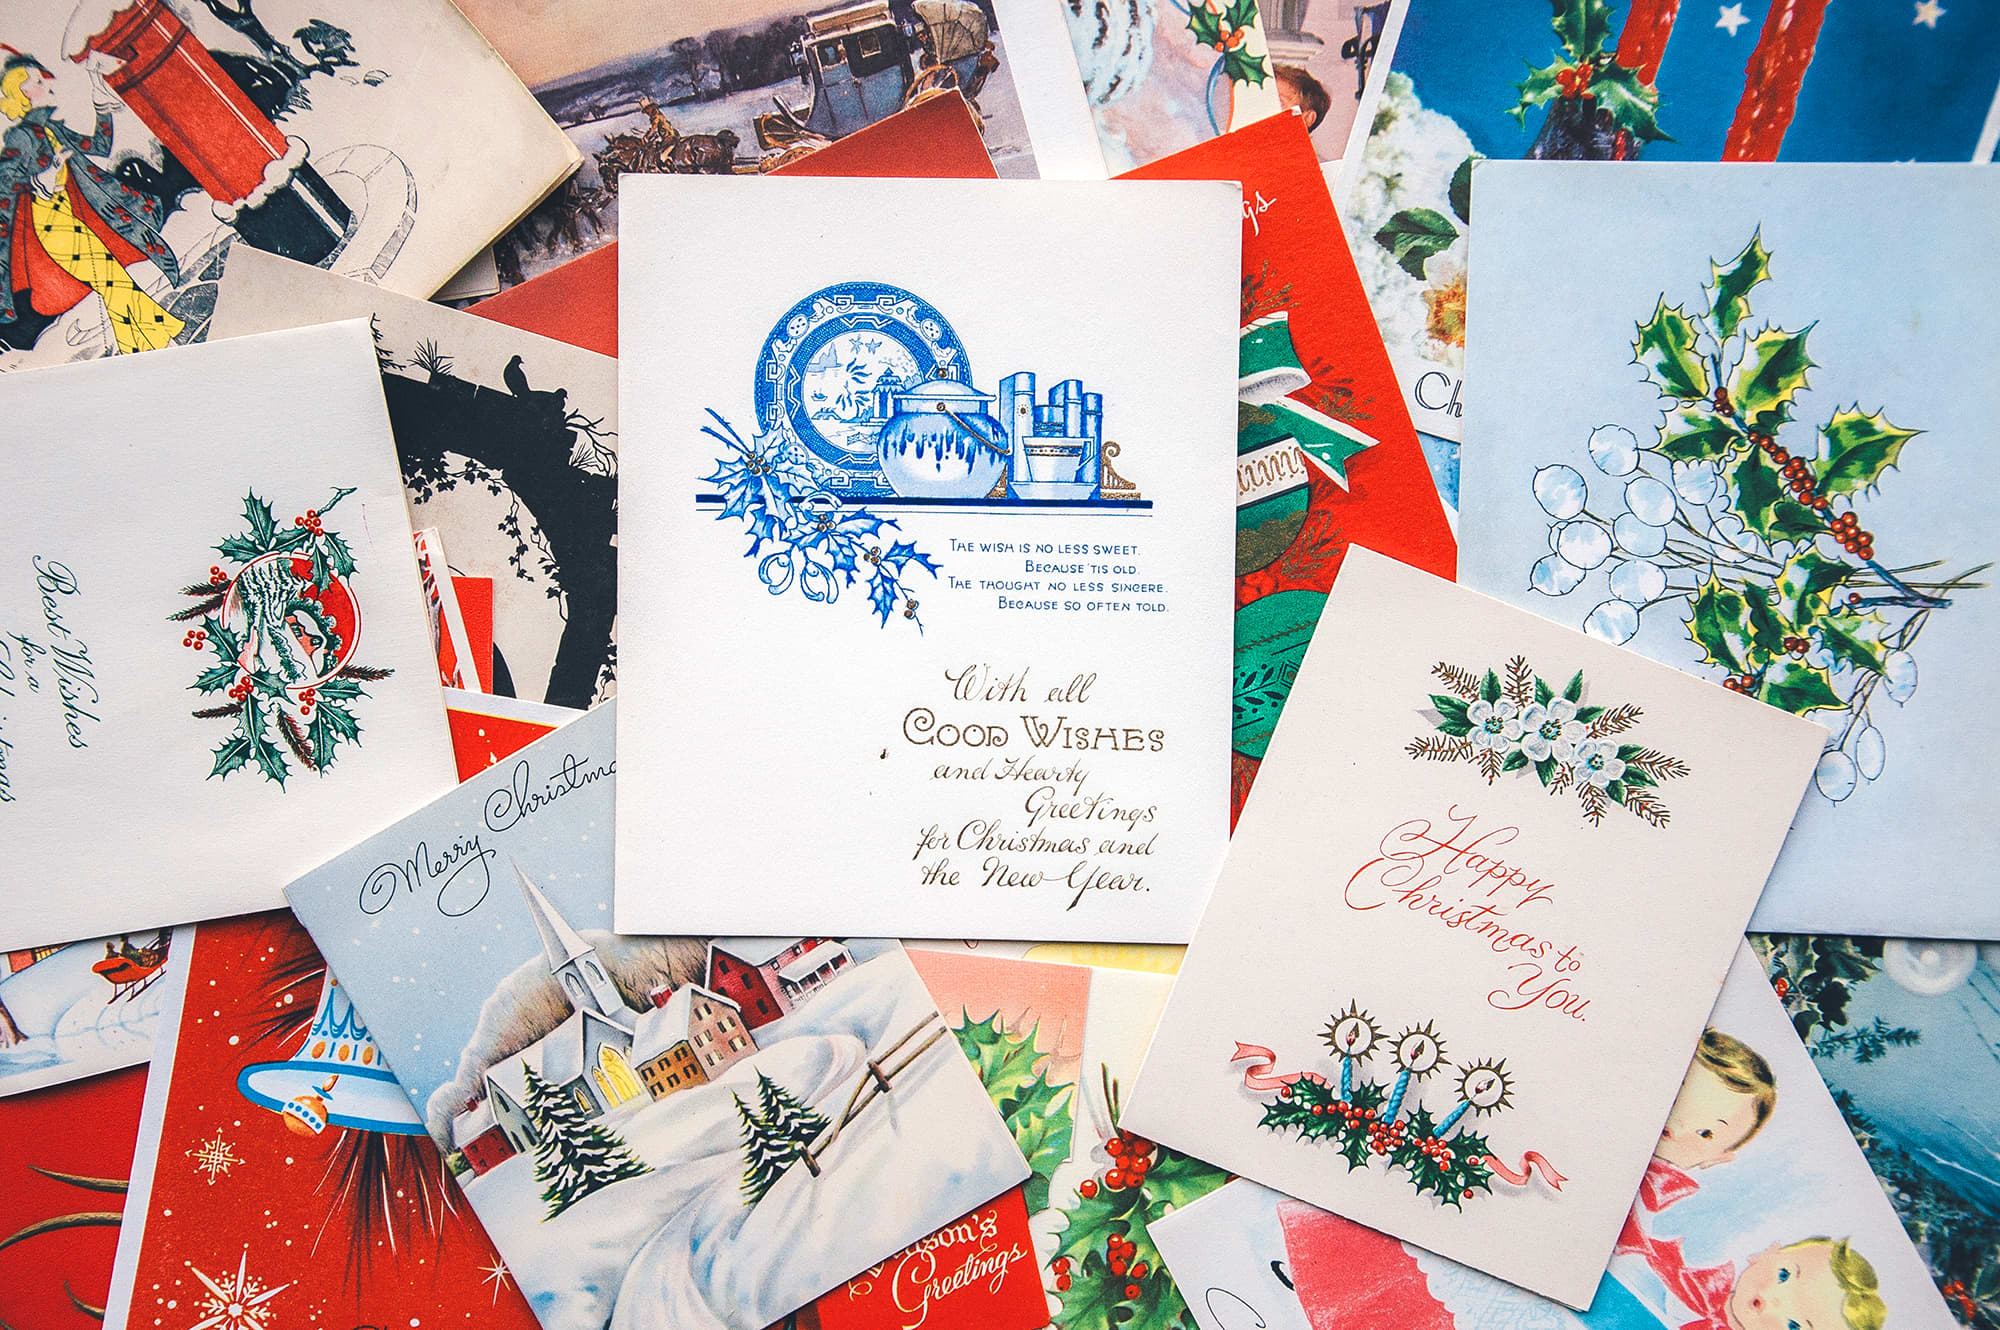 How to Make a Last Name Plural for Holiday Cards